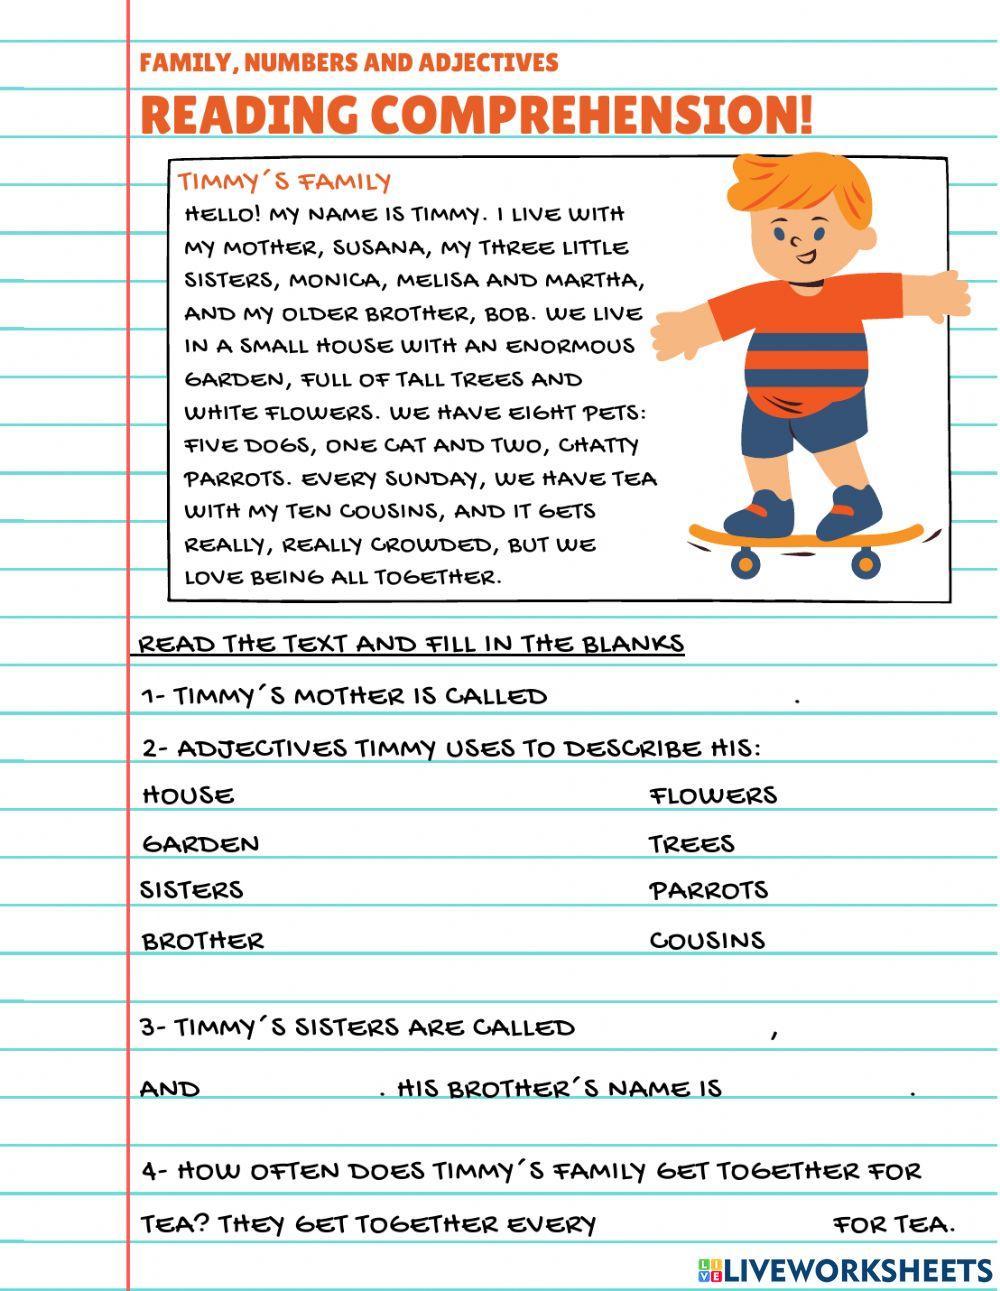 Reading Comprehension: Timmy-s family